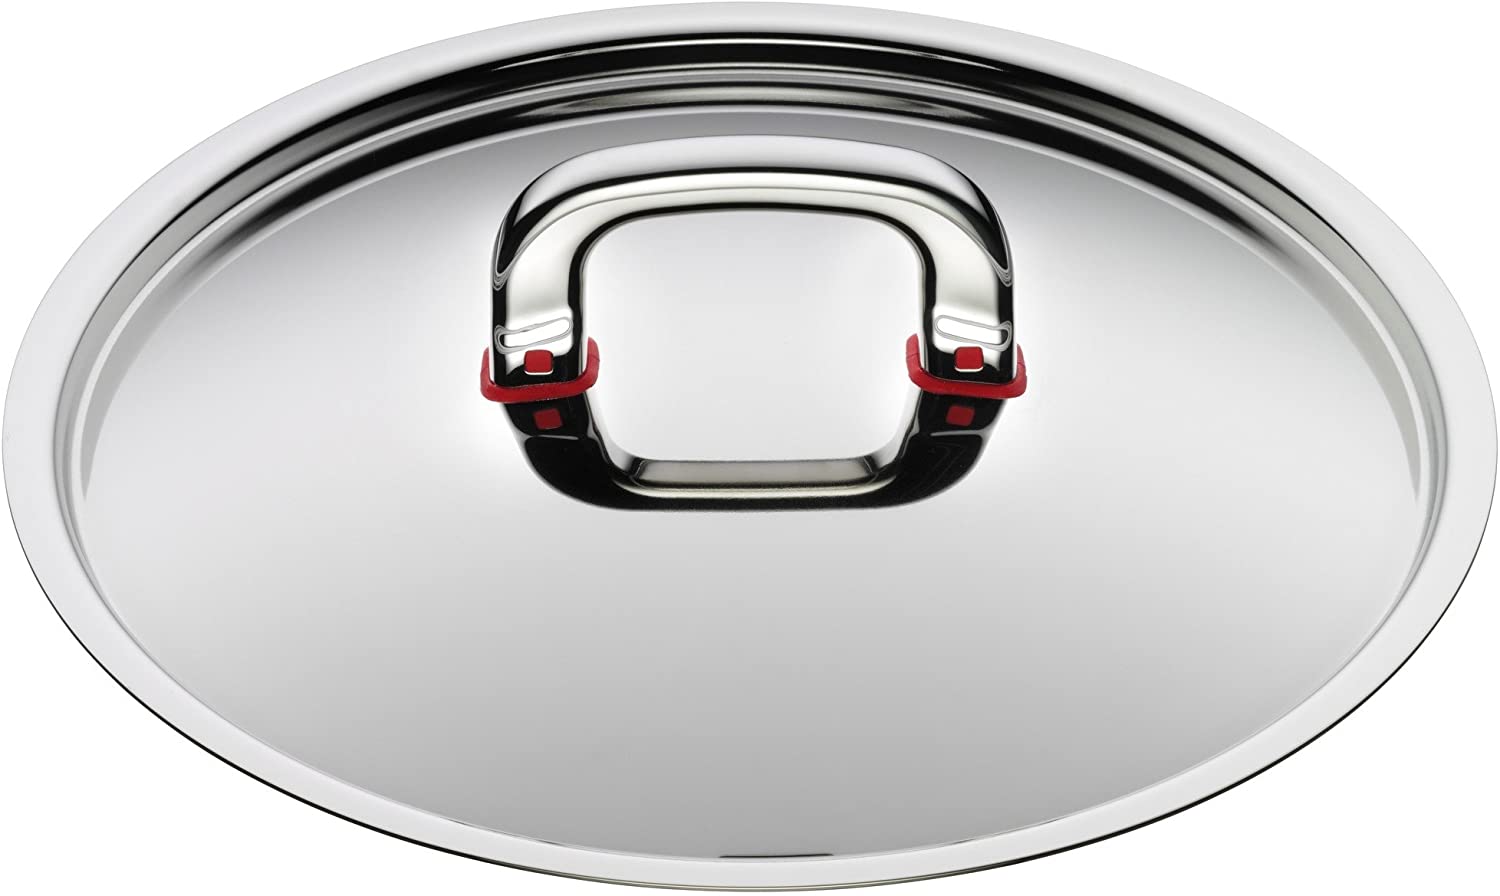 WMF Premium One 18/10 Stainless Steel 24cm Replacement Lid